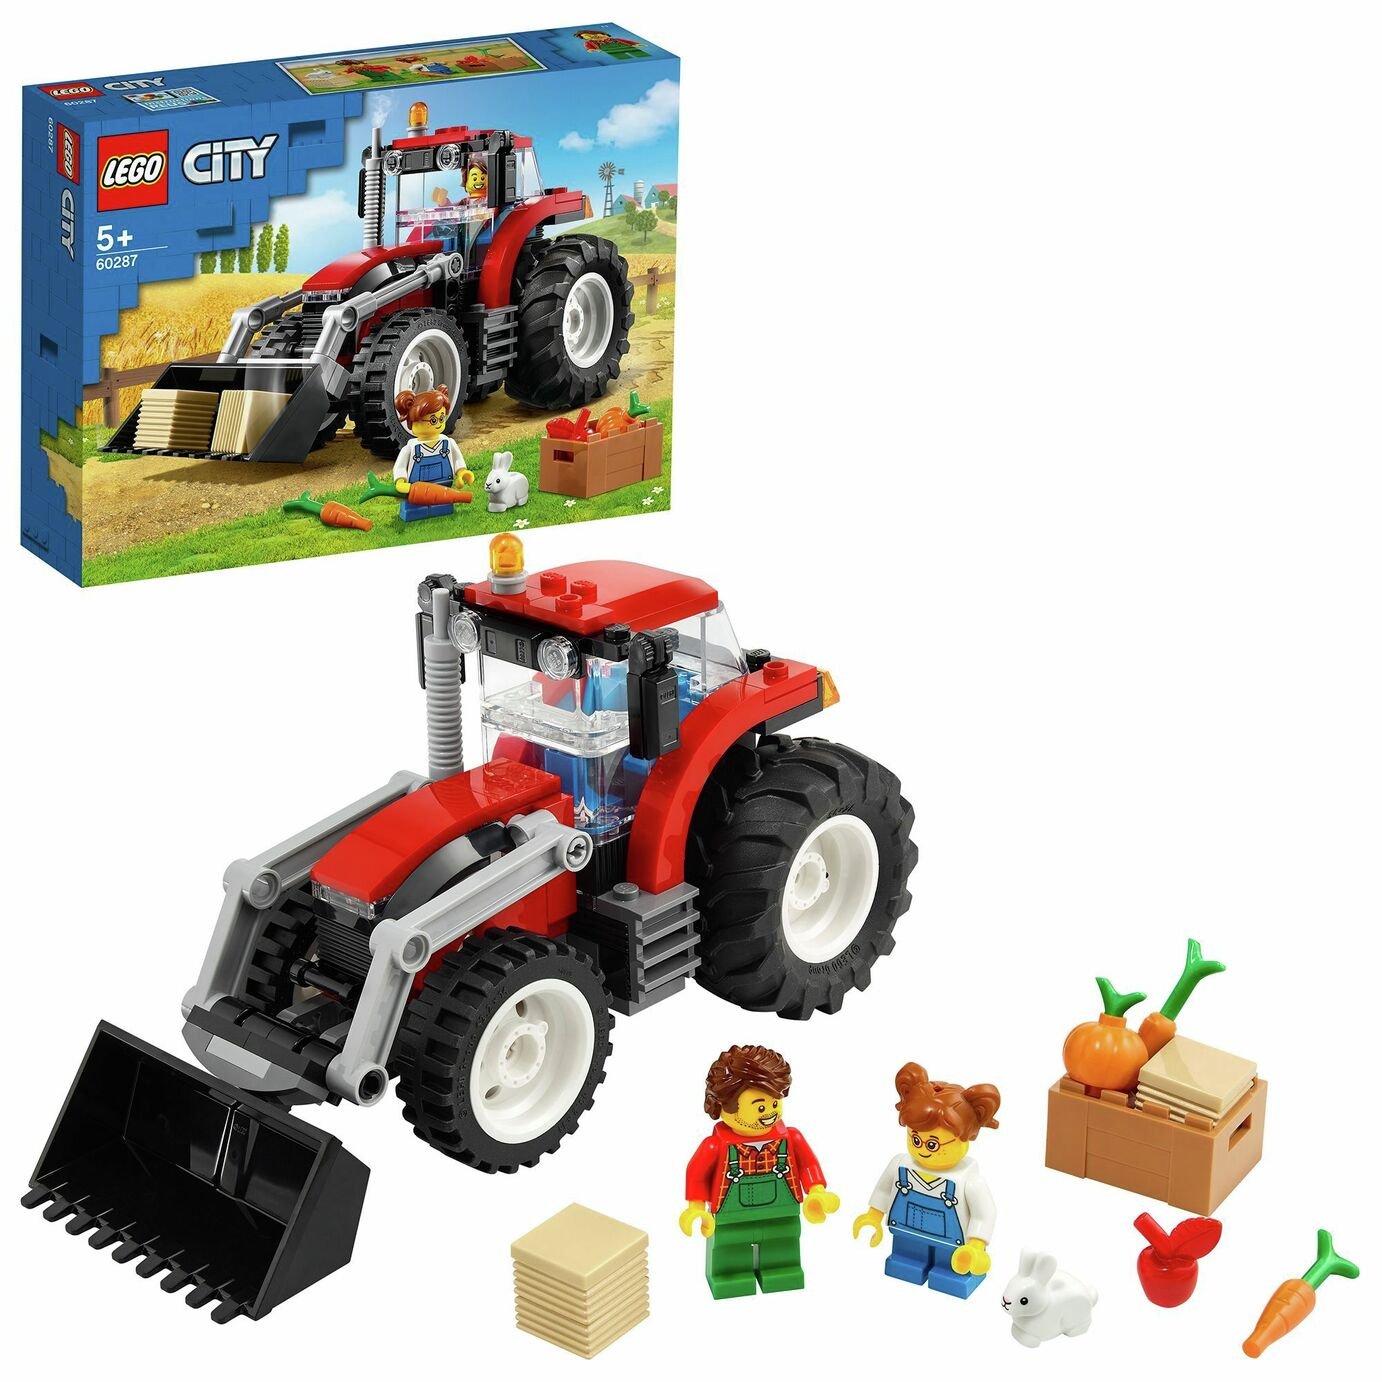 LEGO City Great Vehicles Tractor Toy and Farm Set 60287 review